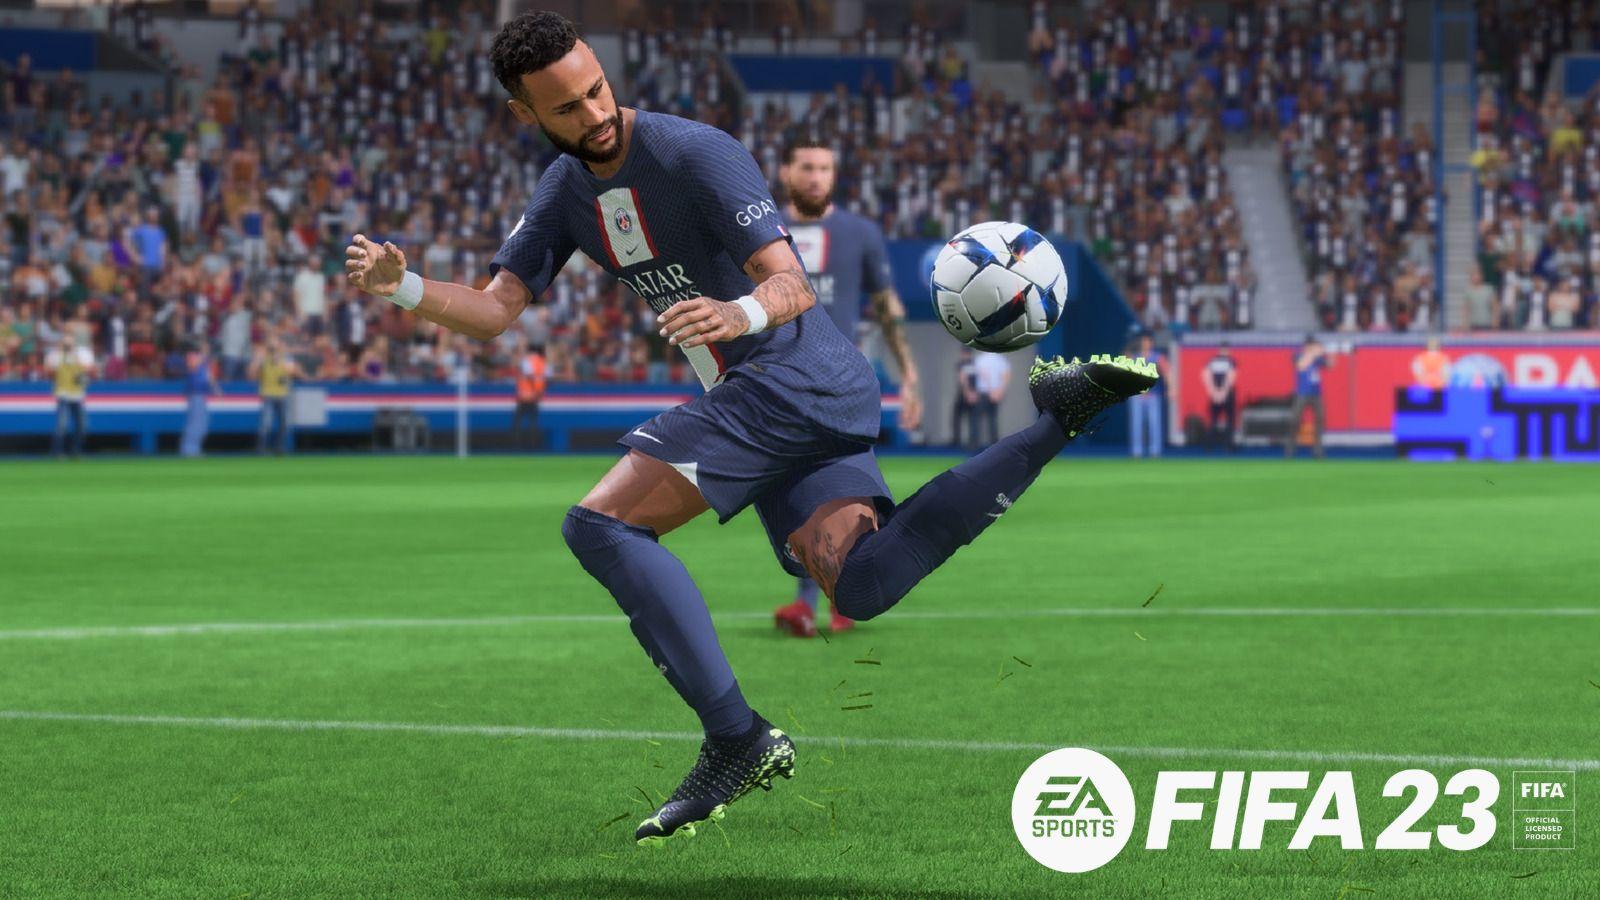 How to juggle the ball in FIFA 23